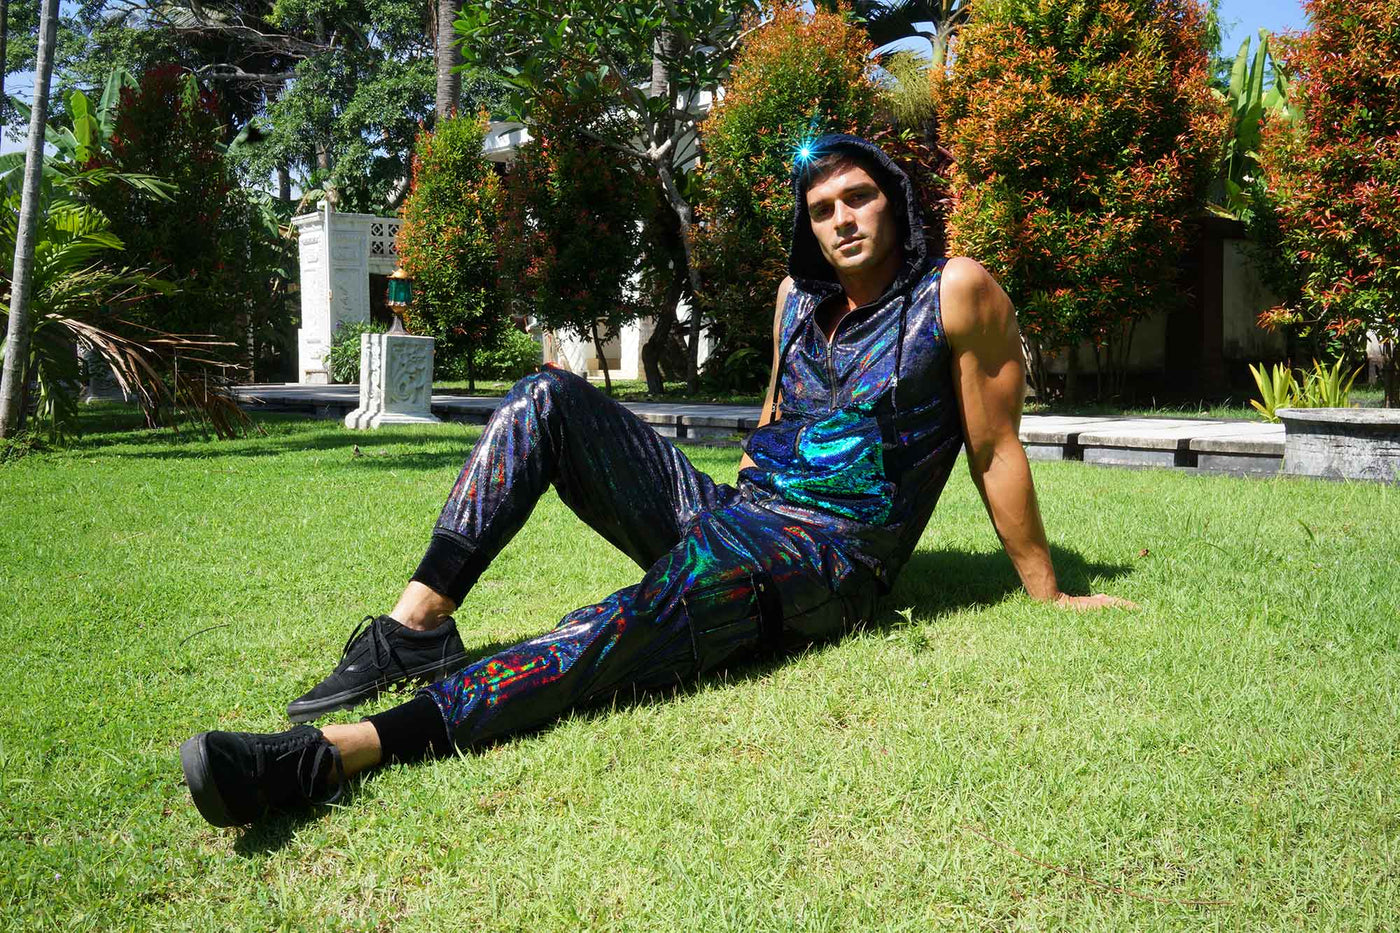 mens casual rave outfit from Love Khaos